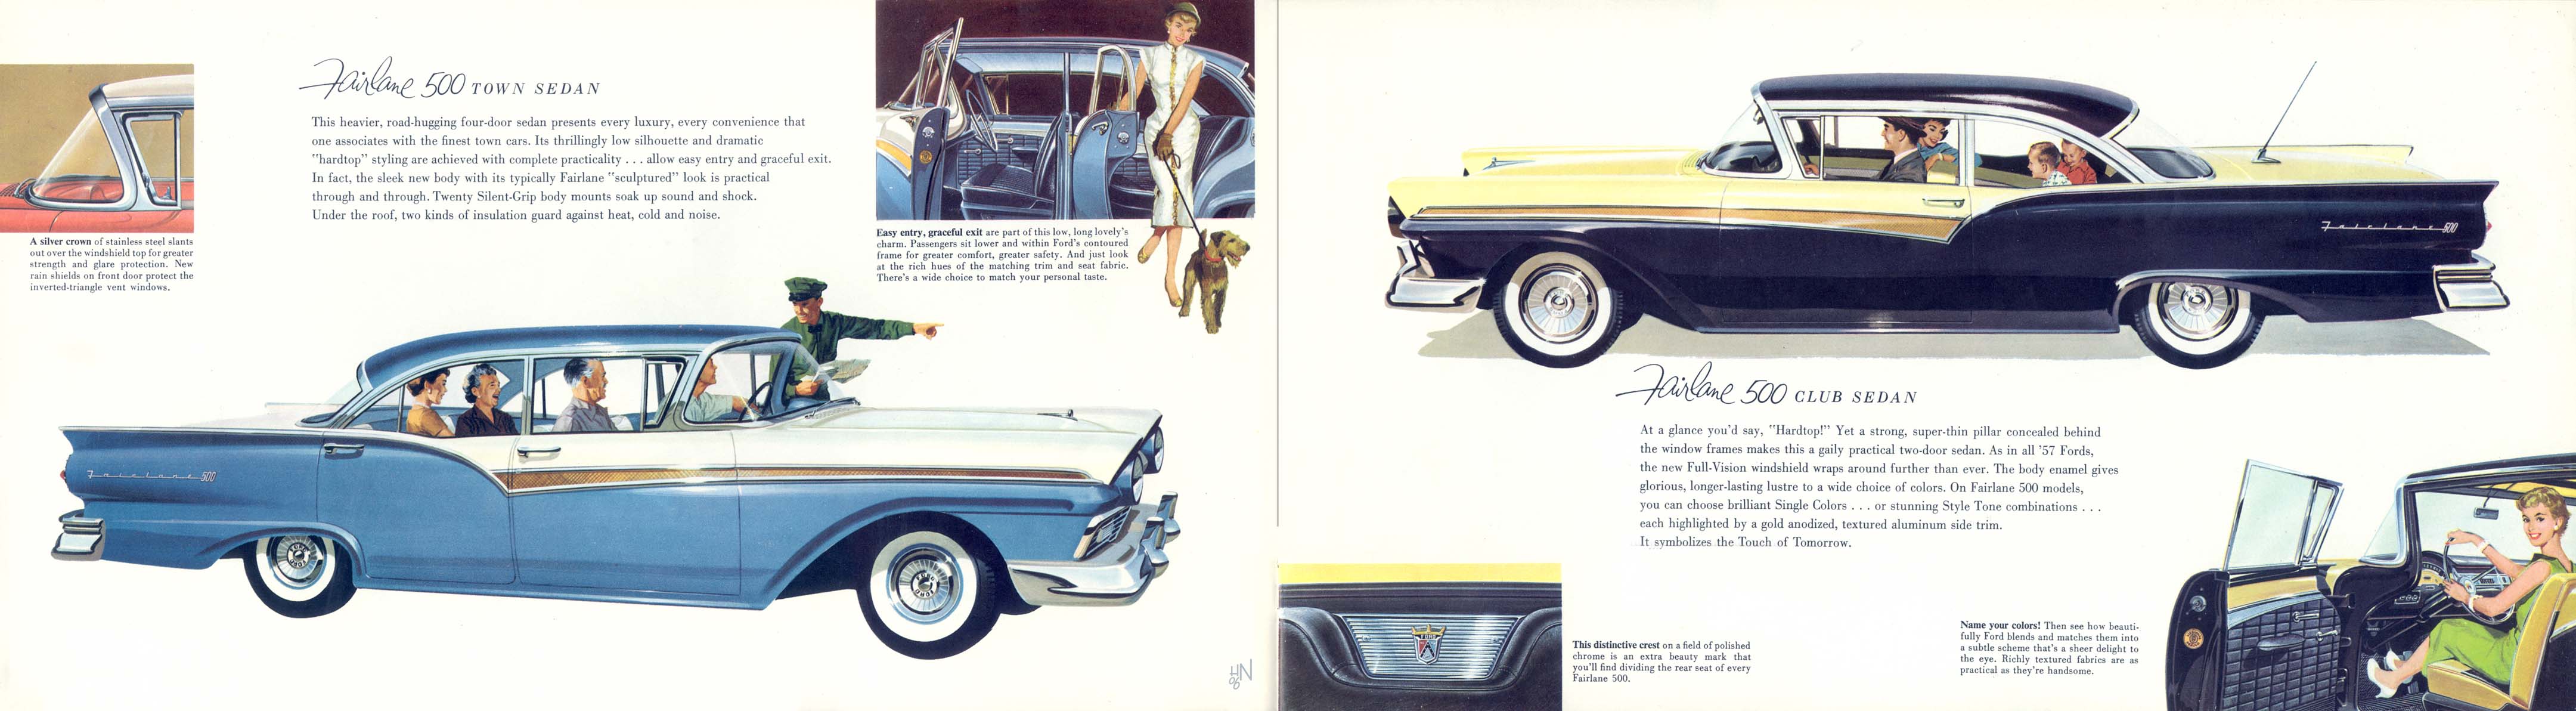 1957 Ford Fairlane Brochure Page 11